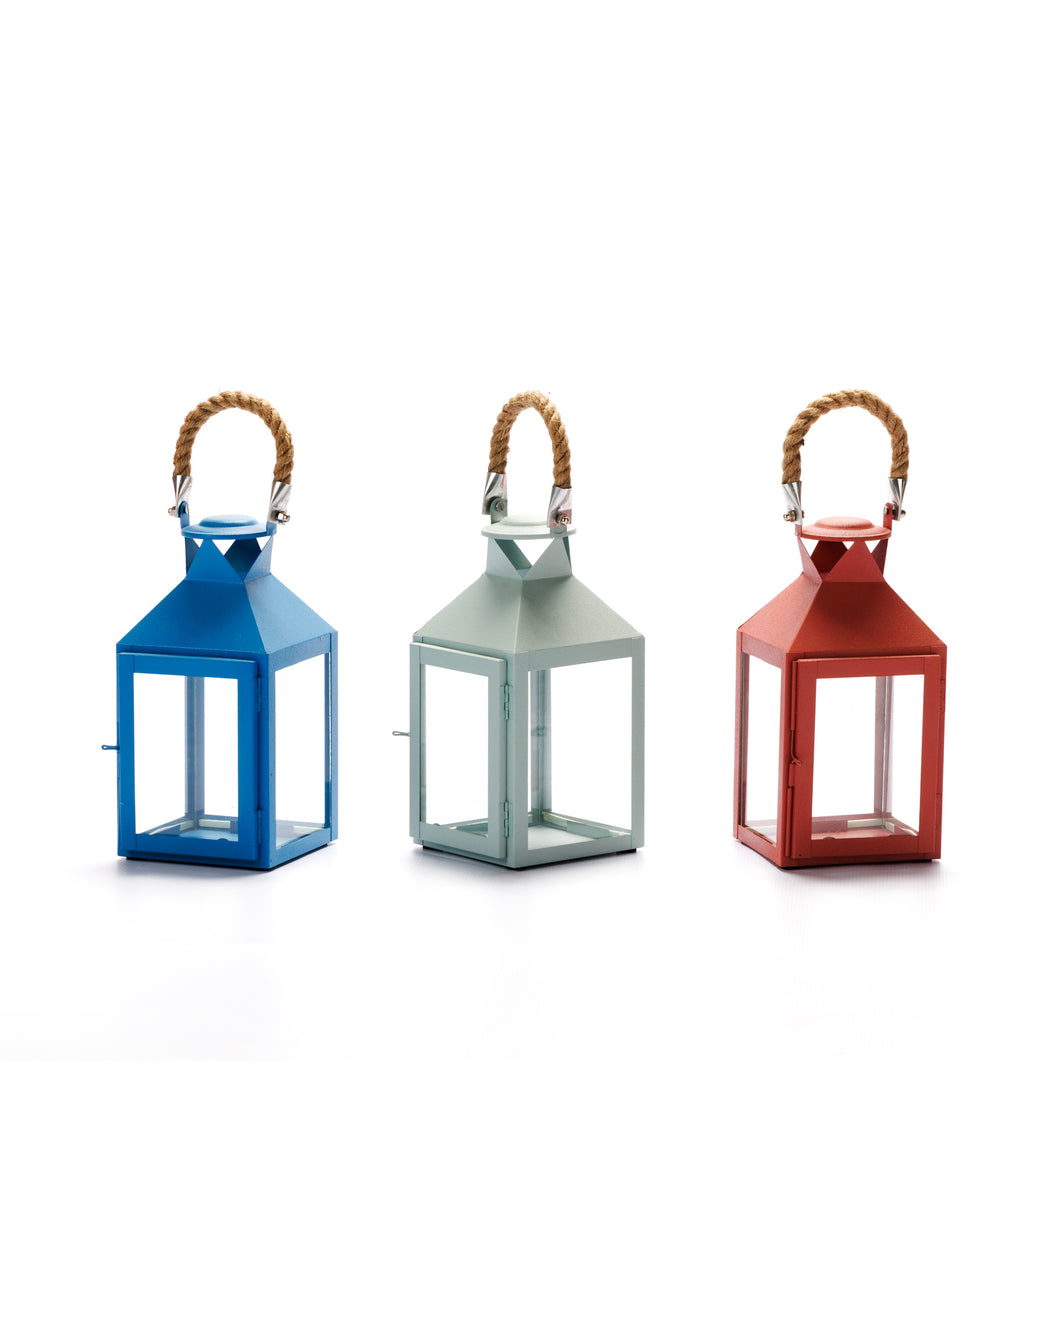 Nautical lanterns made of metal and glass, available in dusty rose, process blue, and sage green